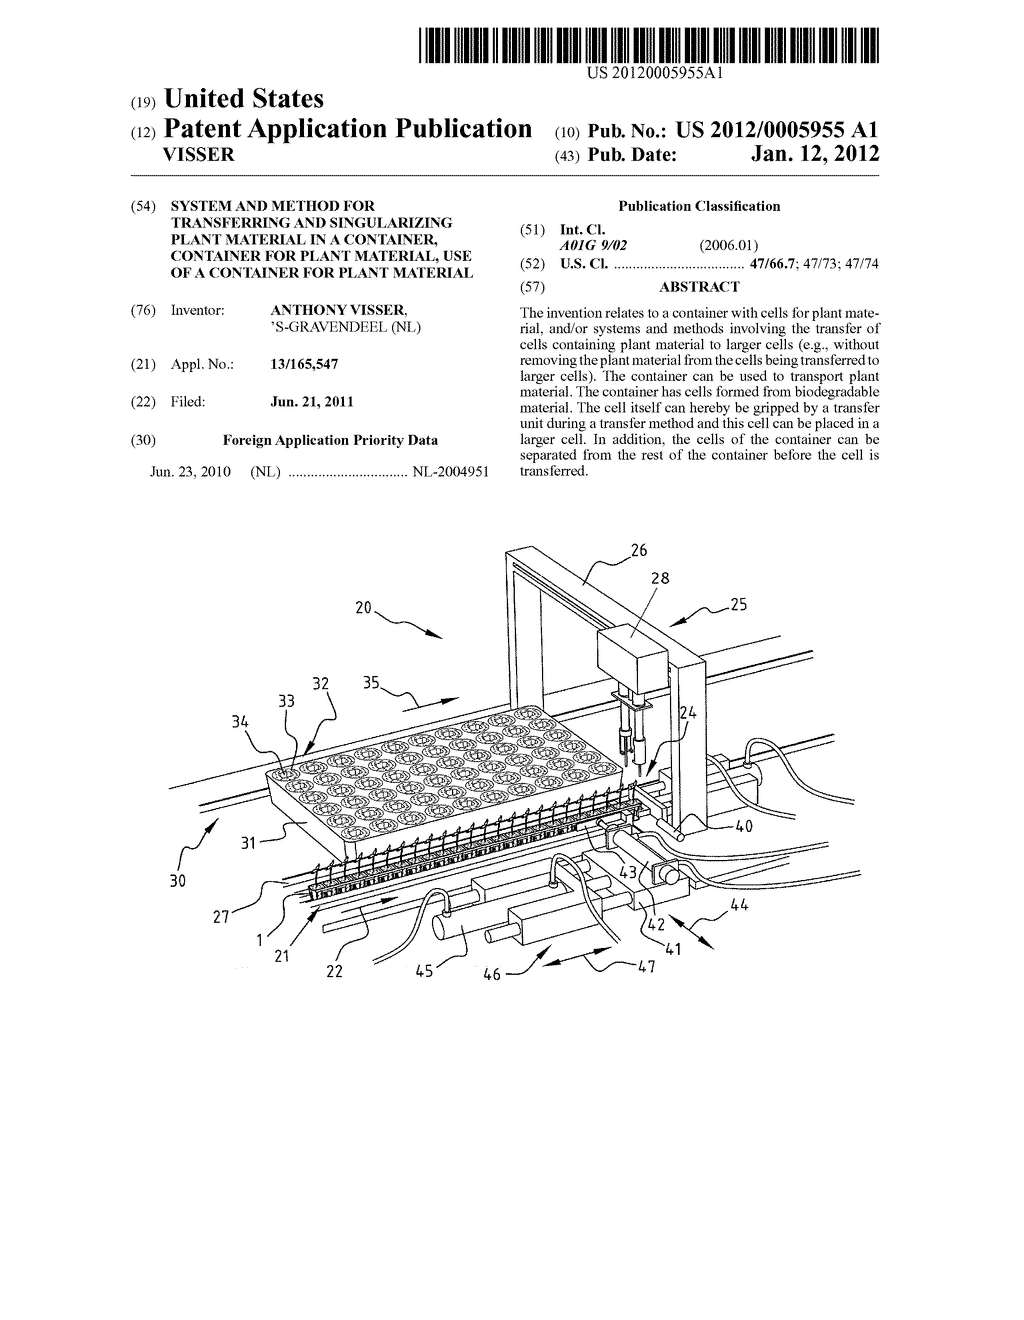 SYSTEM AND METHOD FOR TRANSFERRING AND SINGULARIZING PLANT MATERIAL IN A     CONTAINER, CONTAINER FOR PLANT MATERIAL, USE OF A CONTAINER FOR PLANT     MATERIAL - diagram, schematic, and image 01